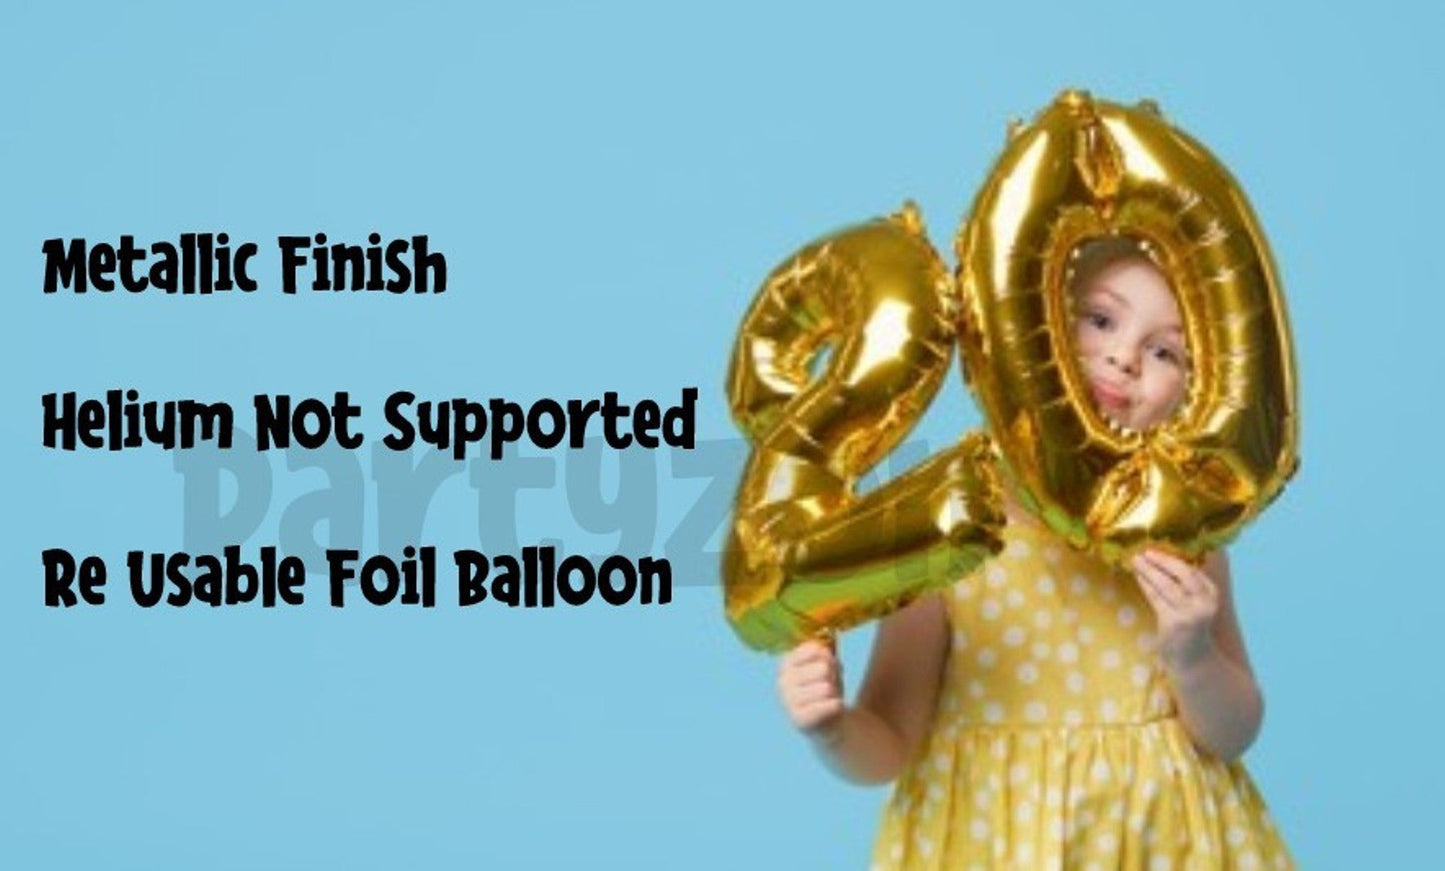 Number 5 Gold Foil Balloon 16 Inches - Balloonistics